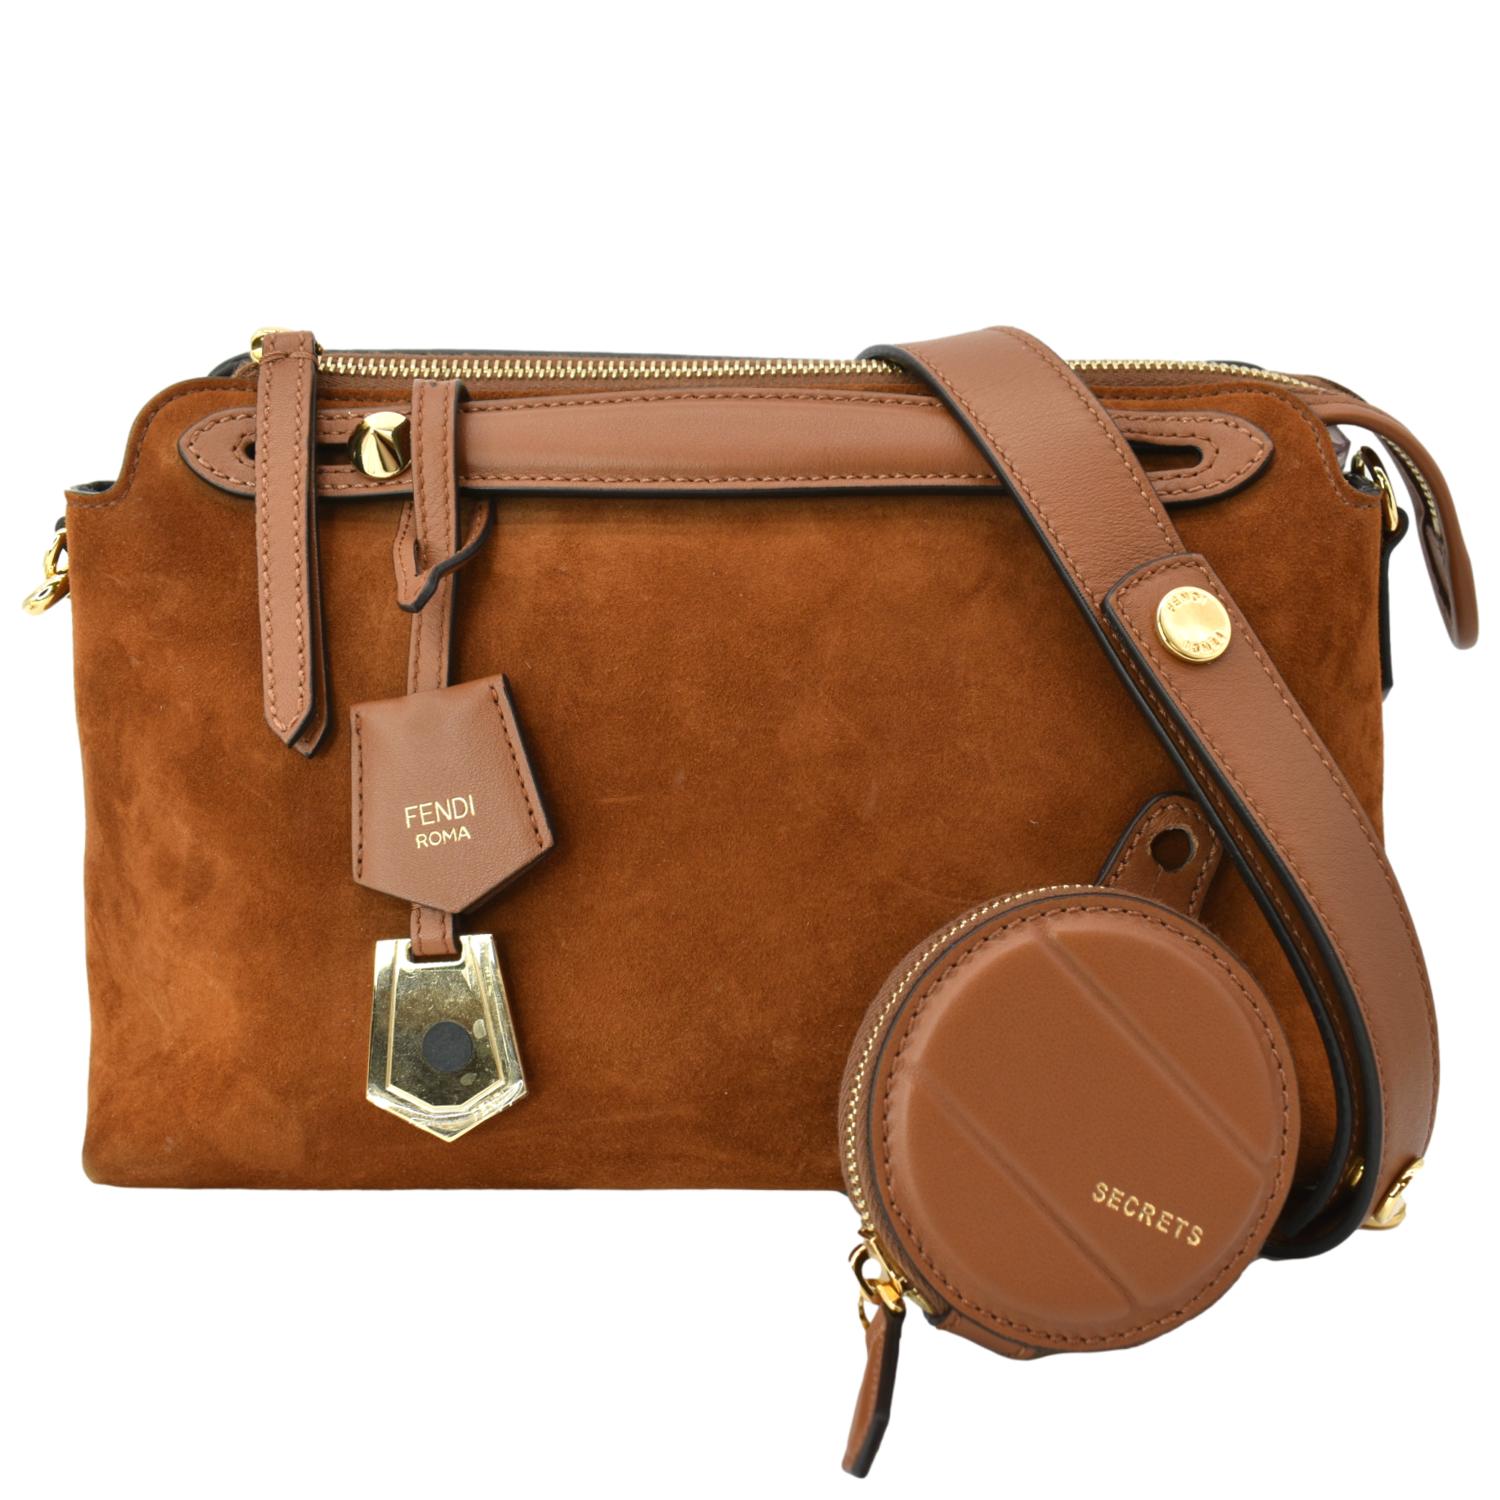 By The Way Medium - Brown leather Boston bag